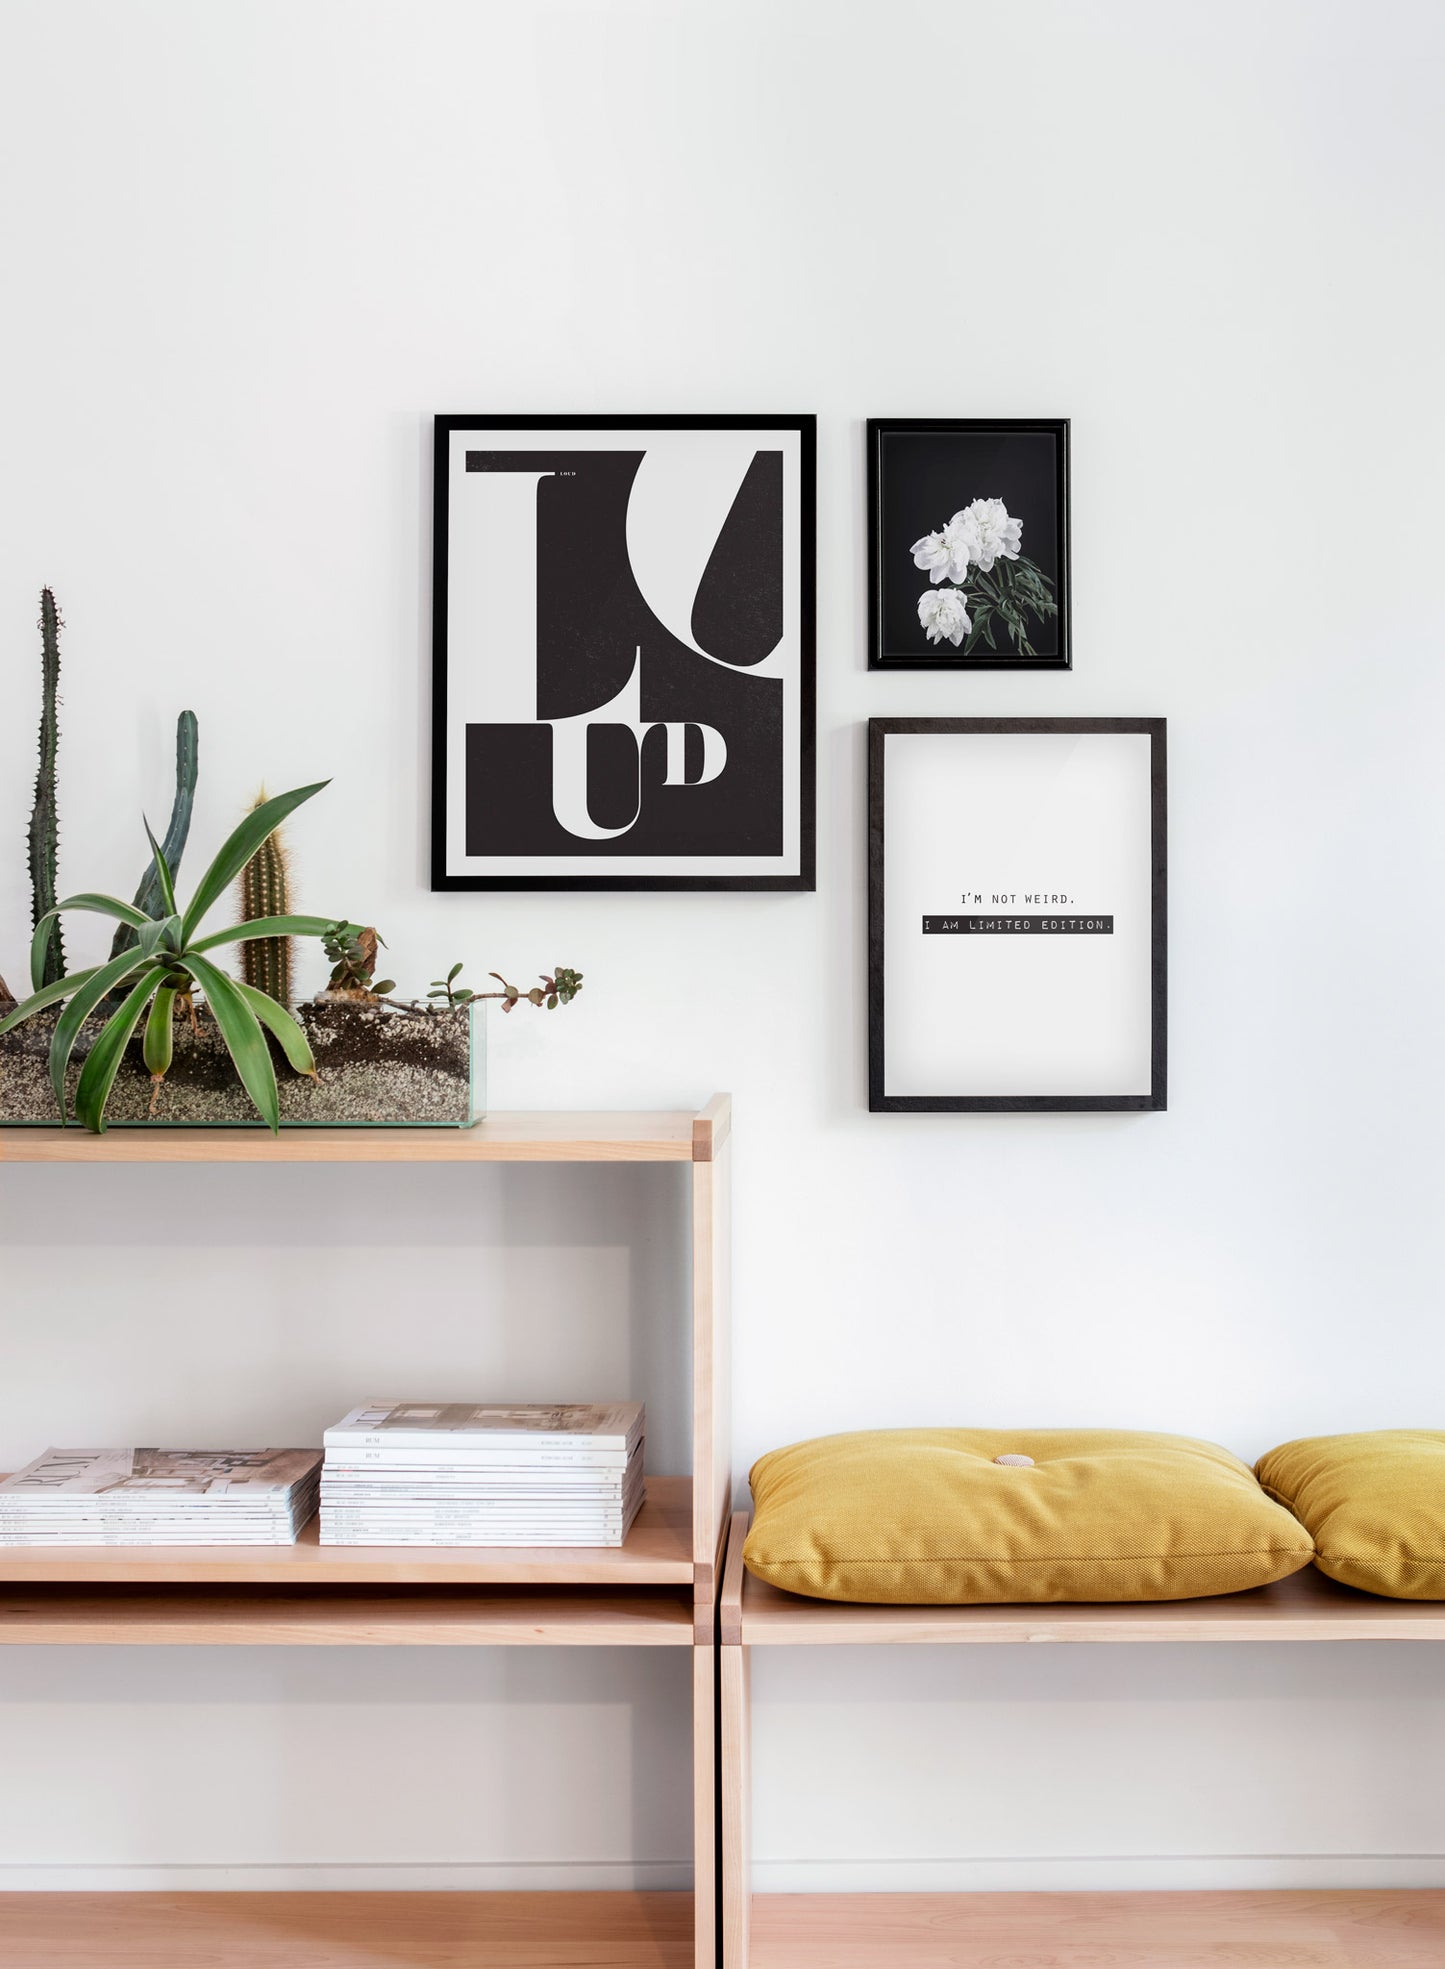 Scandinavian poster by Opposite Wall with trendy graphic typo design - Light my Fire - Living room close-up on yellow cushions and a cactus